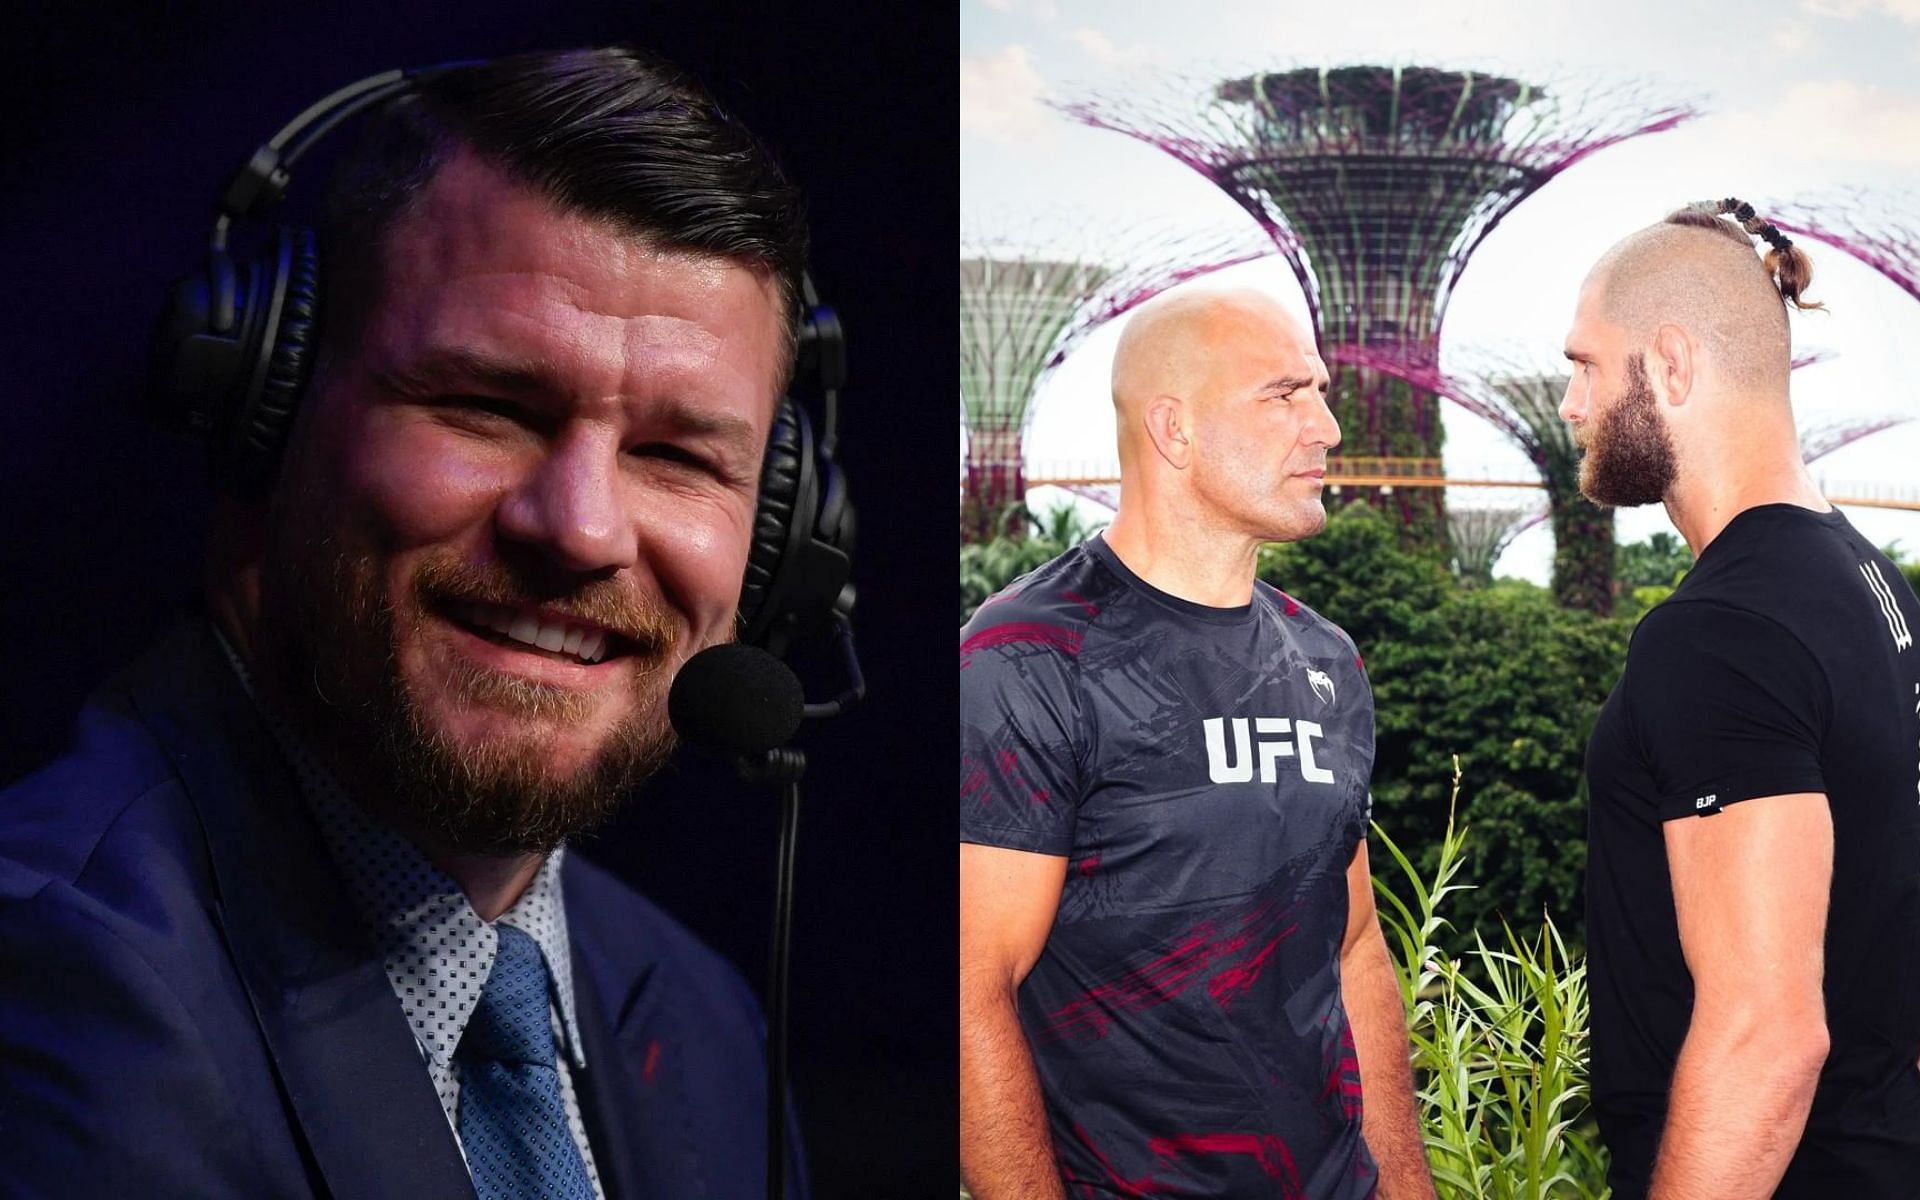 Michael Bisping (left), Glover Teixeira and Jiri Prochazka face-off (right) [Images courtesy of Getty and @ufc Instagram]